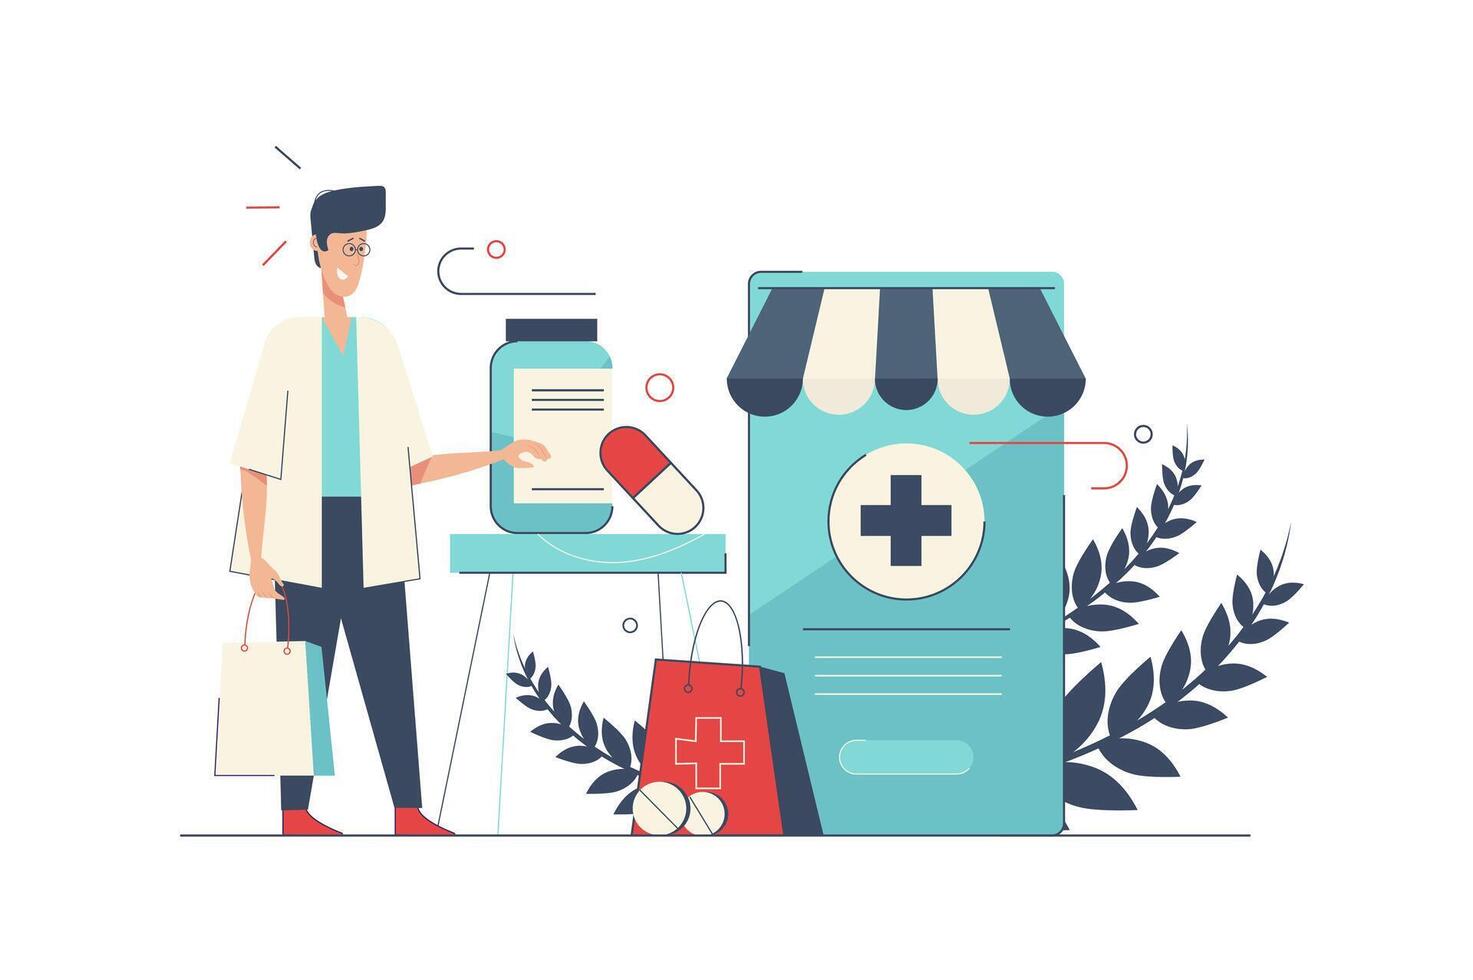 Medical clinic concept with people scene in flat cartoon design. Doctor consults and diagnostics patients, prescribes treatment, online pharmacy. illustration with character situation for web vector